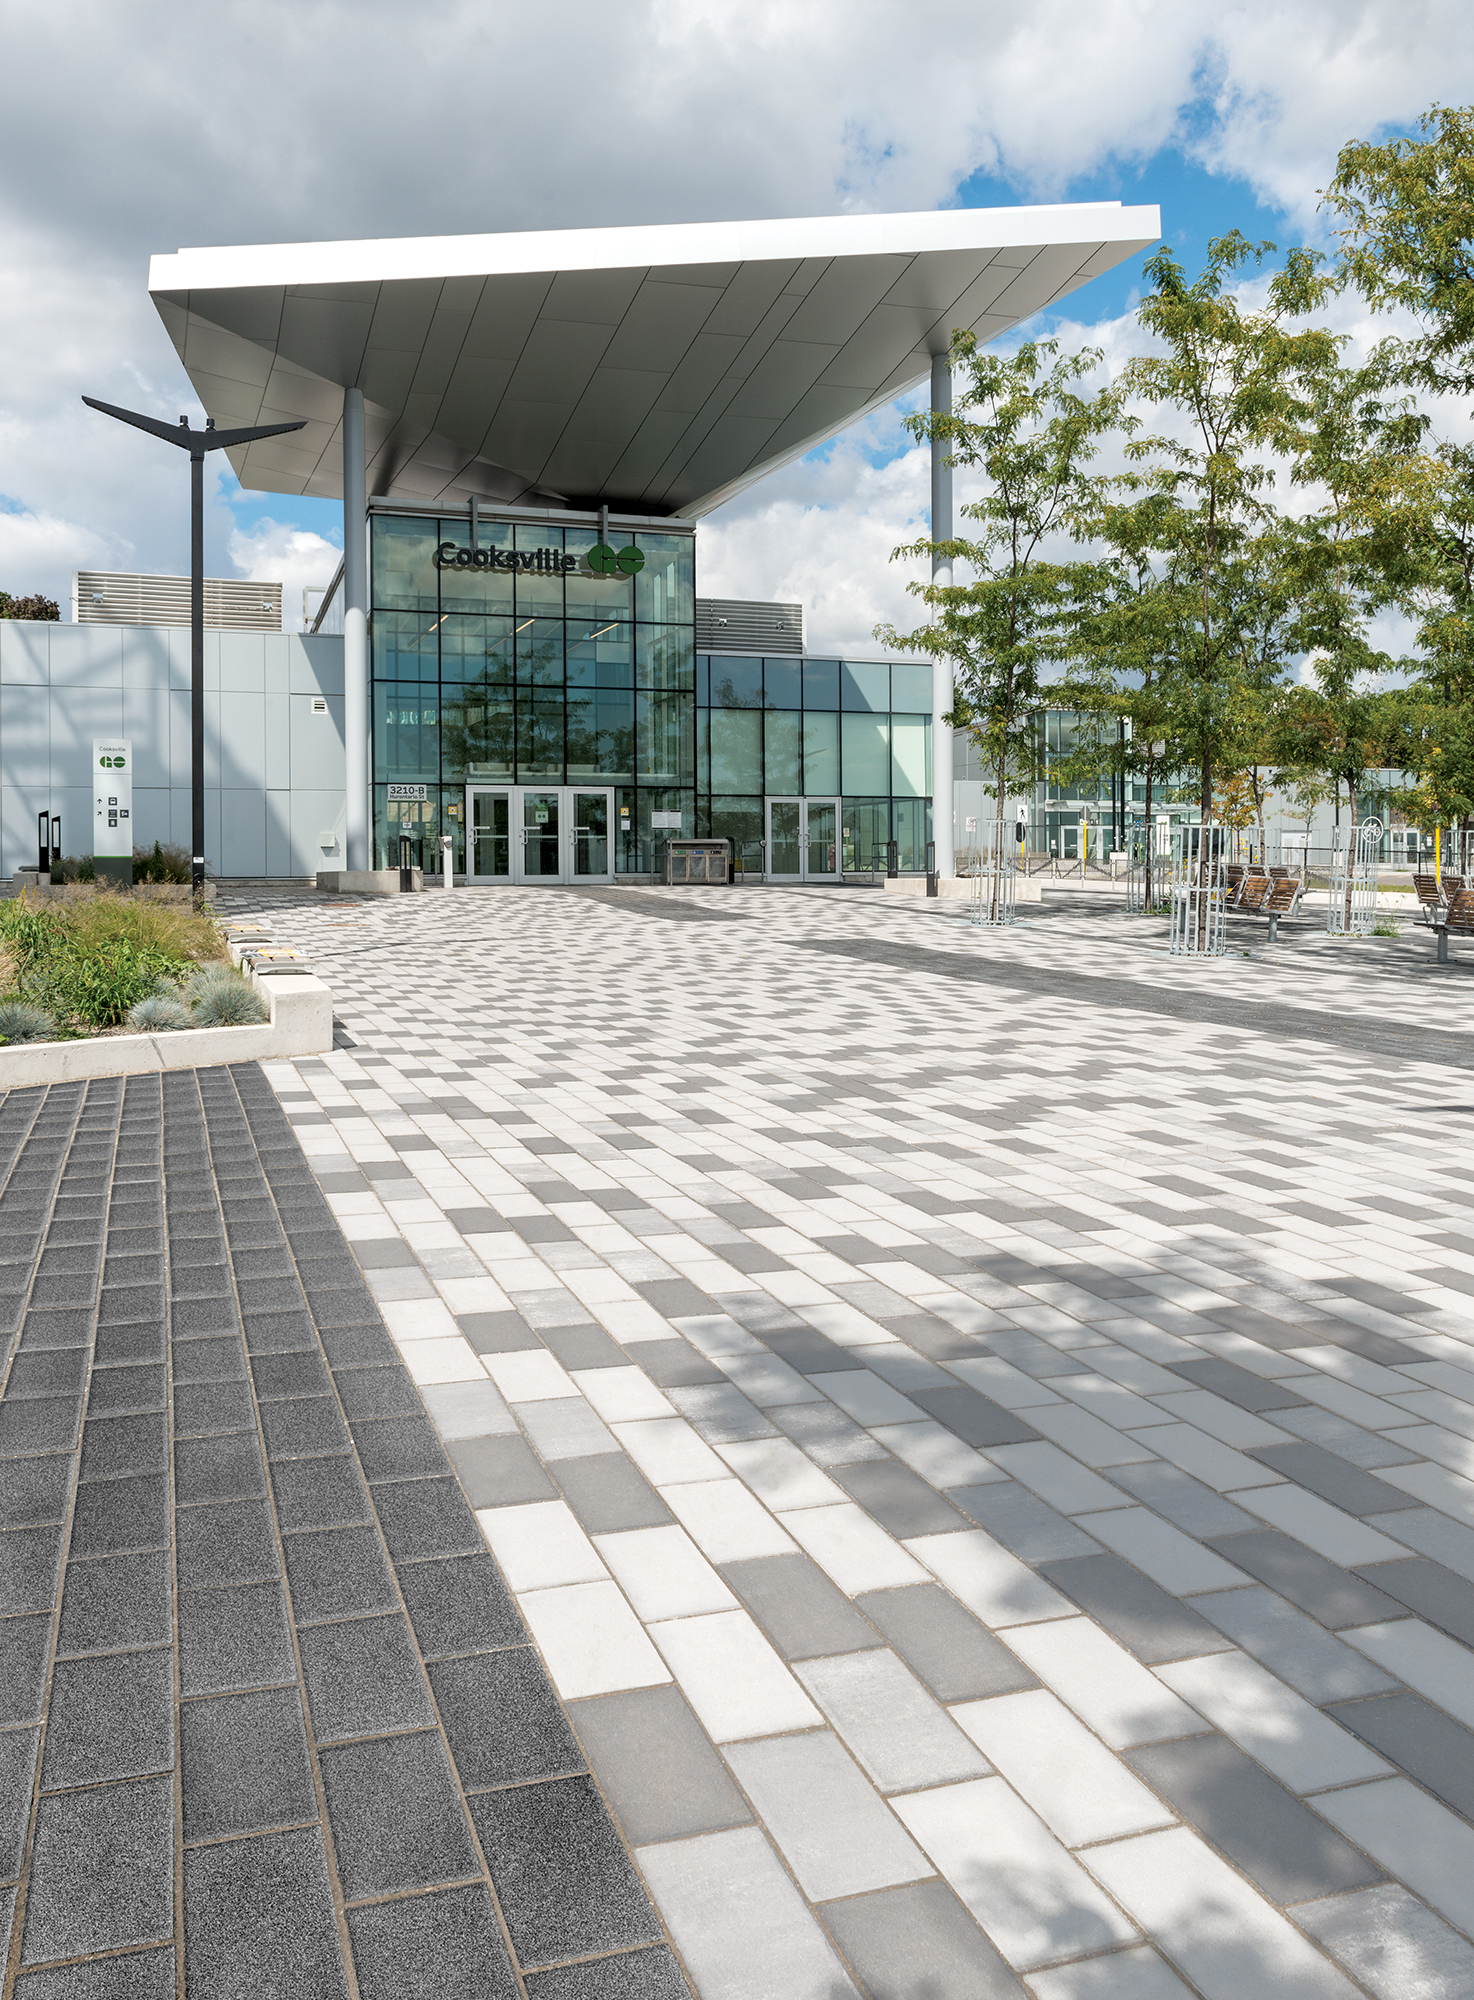 Tri-colored Promenade Plank pavers lead toward the Cooksville Go station, mimicking the building's modern architecture.